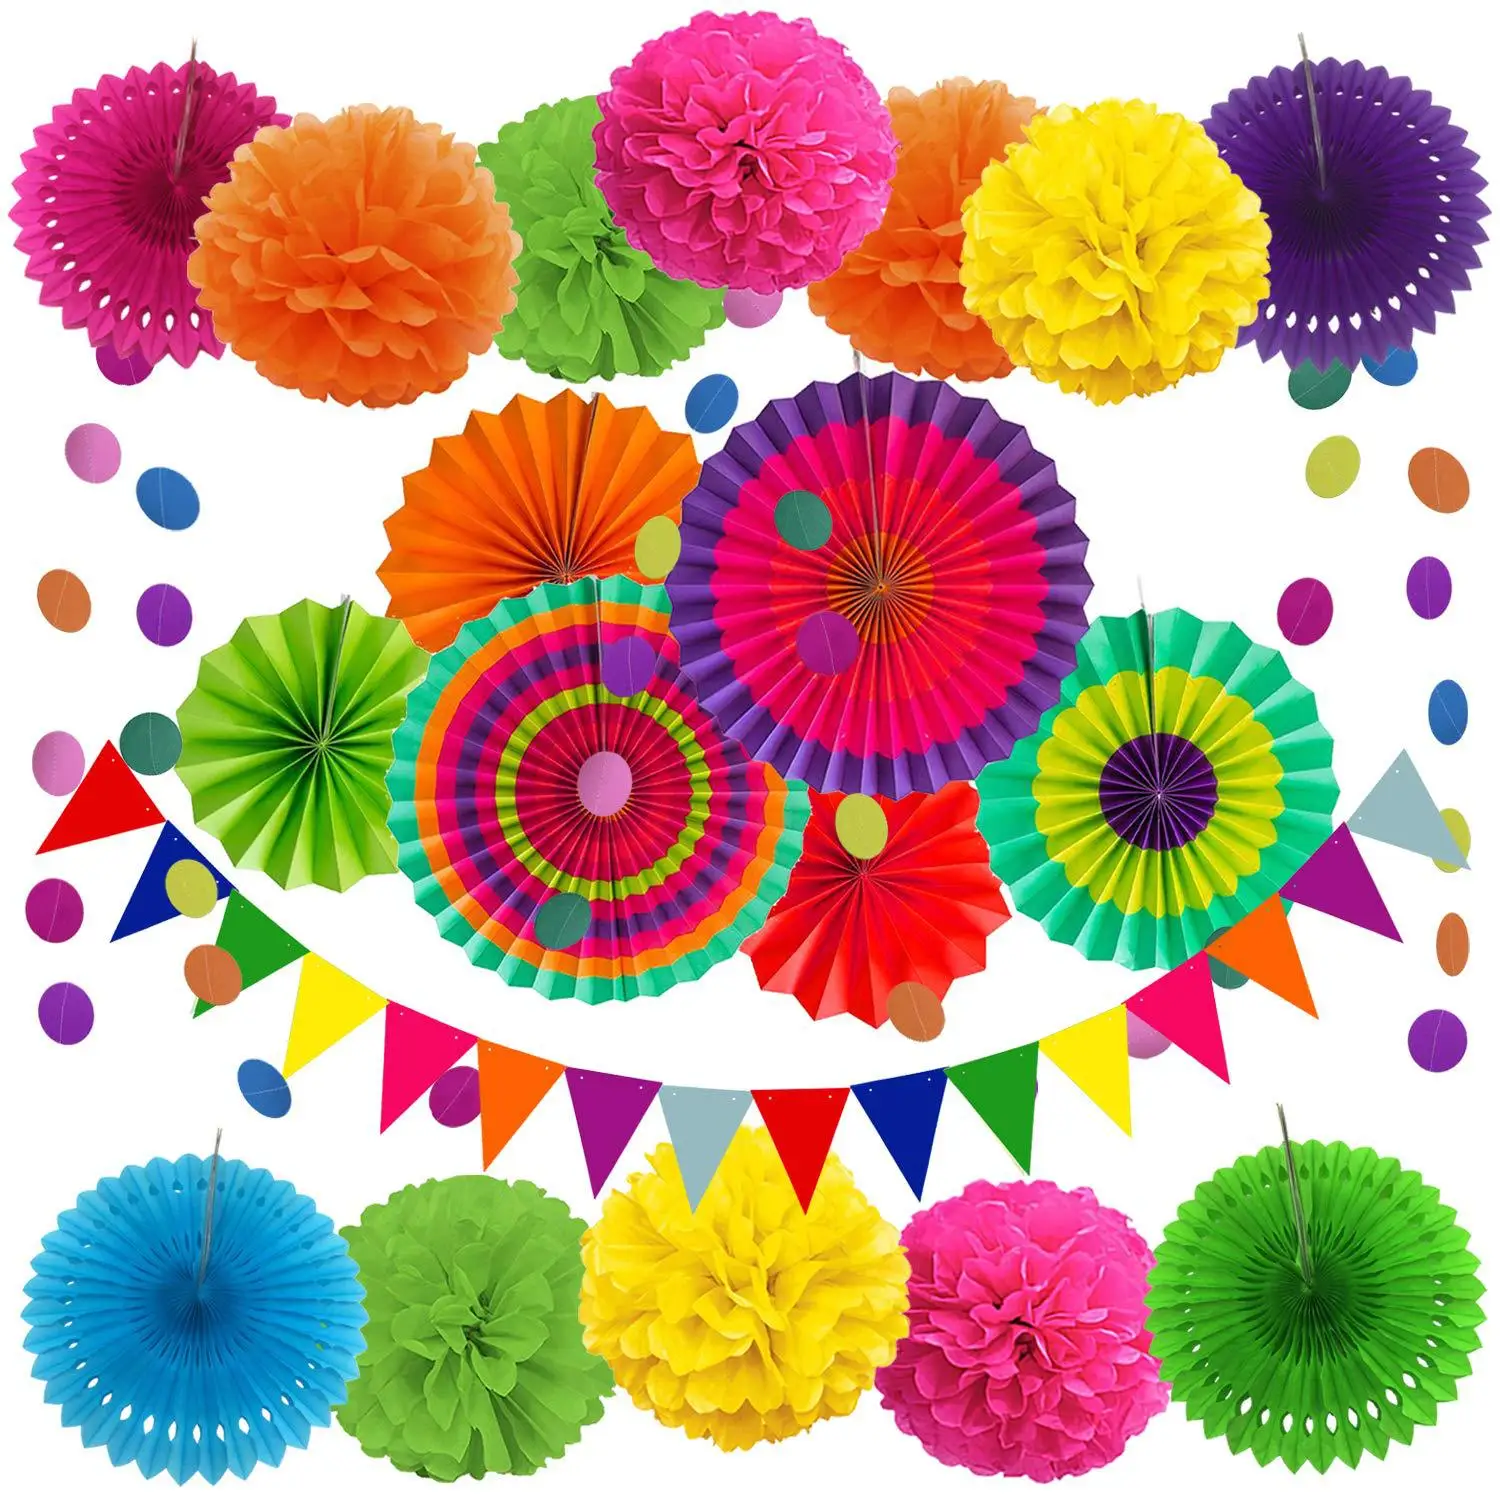 

21 Pcs Hanging Paper Fans Pom Poms Flowers Garlands String Triangle Bunting Flags for Wedding Birthday Party Fiesta Decoration